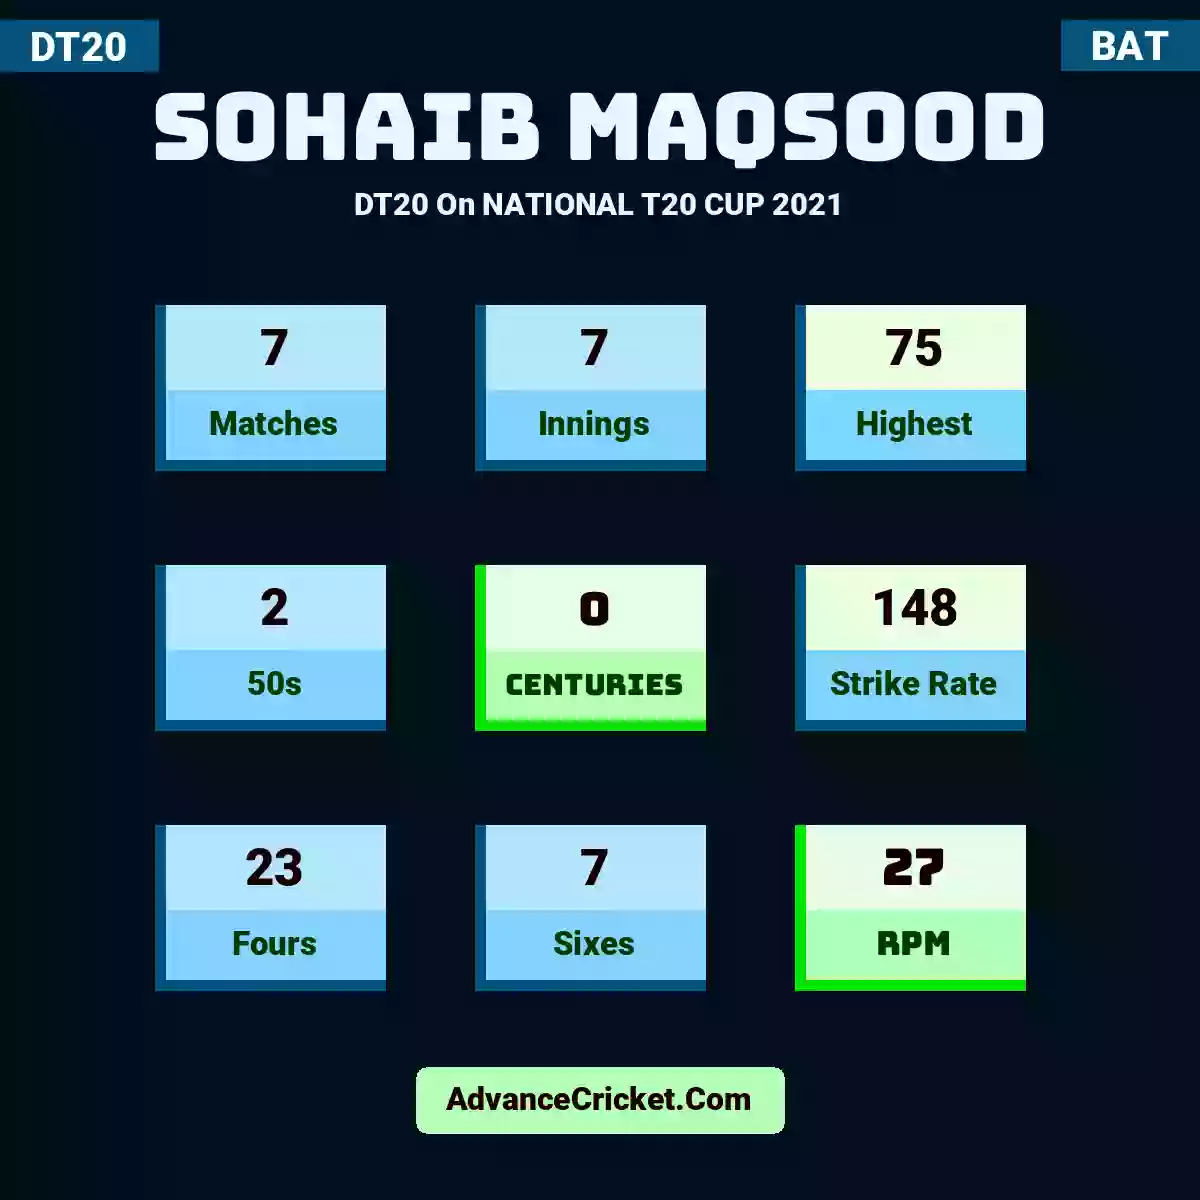 Sohaib Maqsood DT20  On NATIONAL T20 CUP 2021, Sohaib Maqsood played 7 matches, scored 75 runs as highest, 2 half-centuries, and 0 centuries, with a strike rate of 148. S.Maqsood hit 23 fours and 7 sixes, with an RPM of 27.